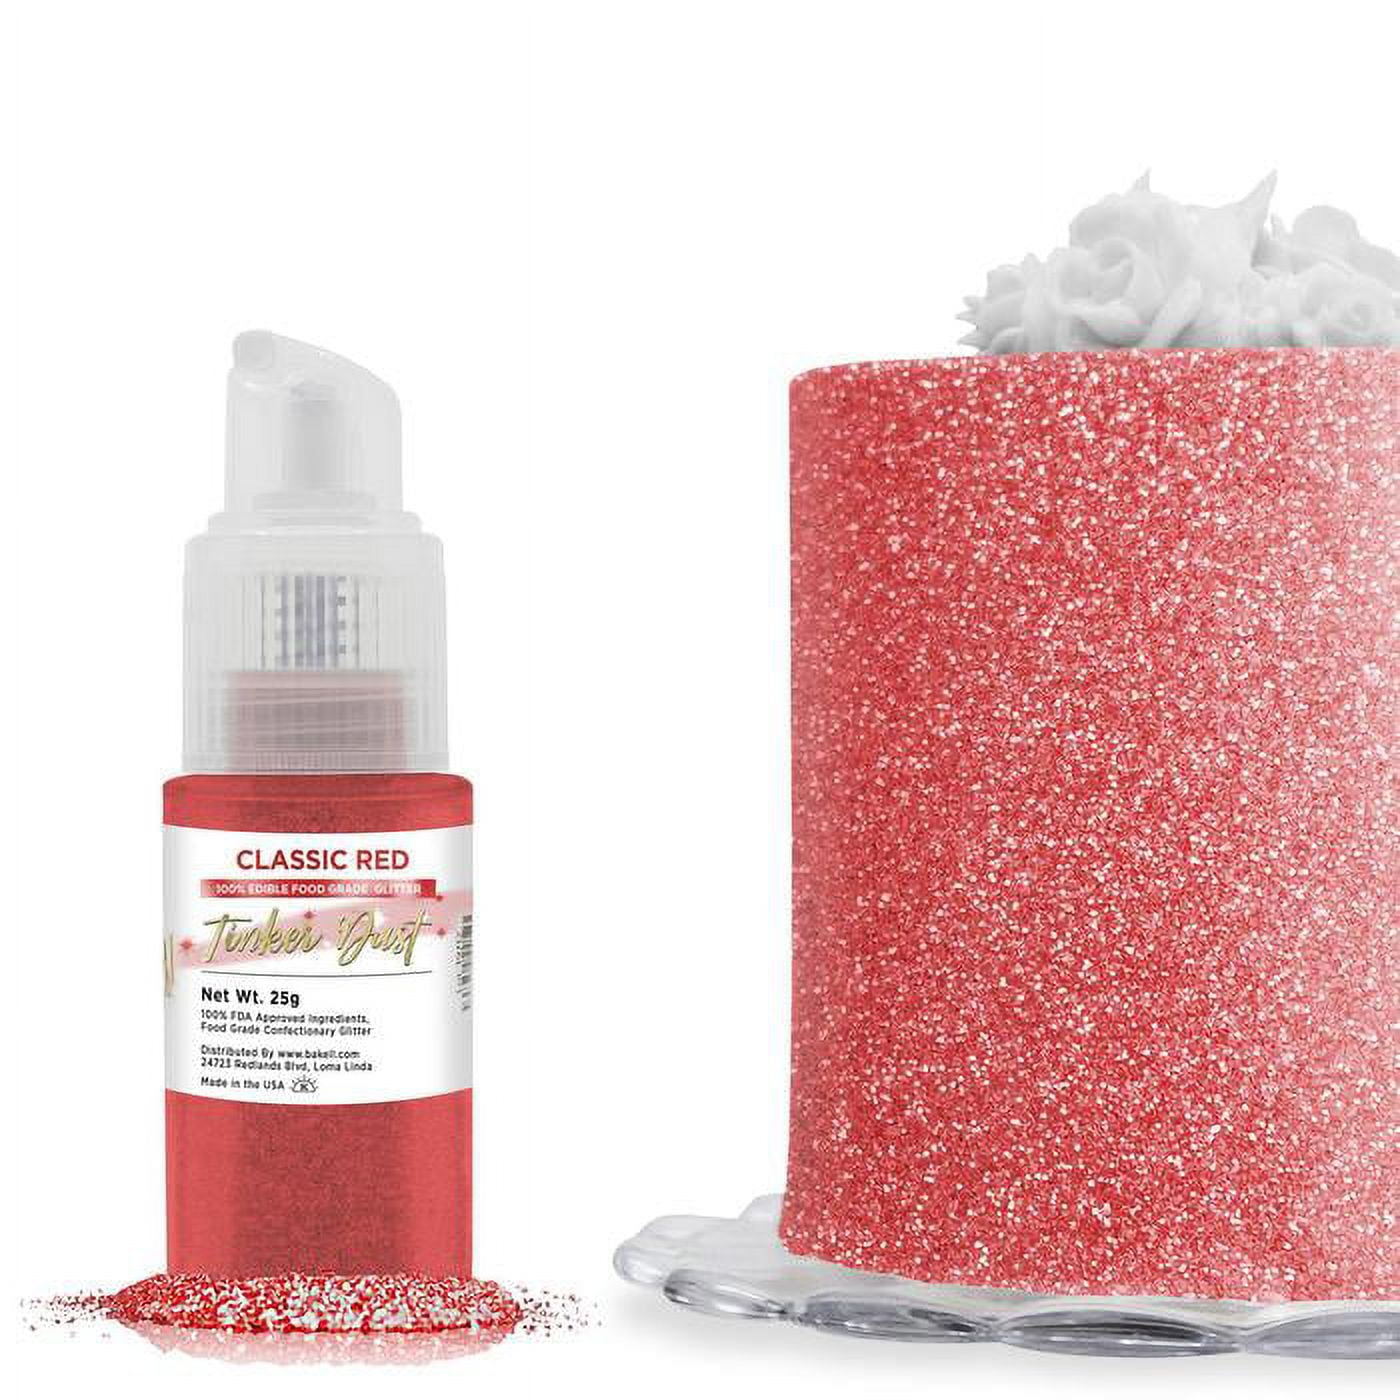 Bake-it-yourself - Edible red glitter